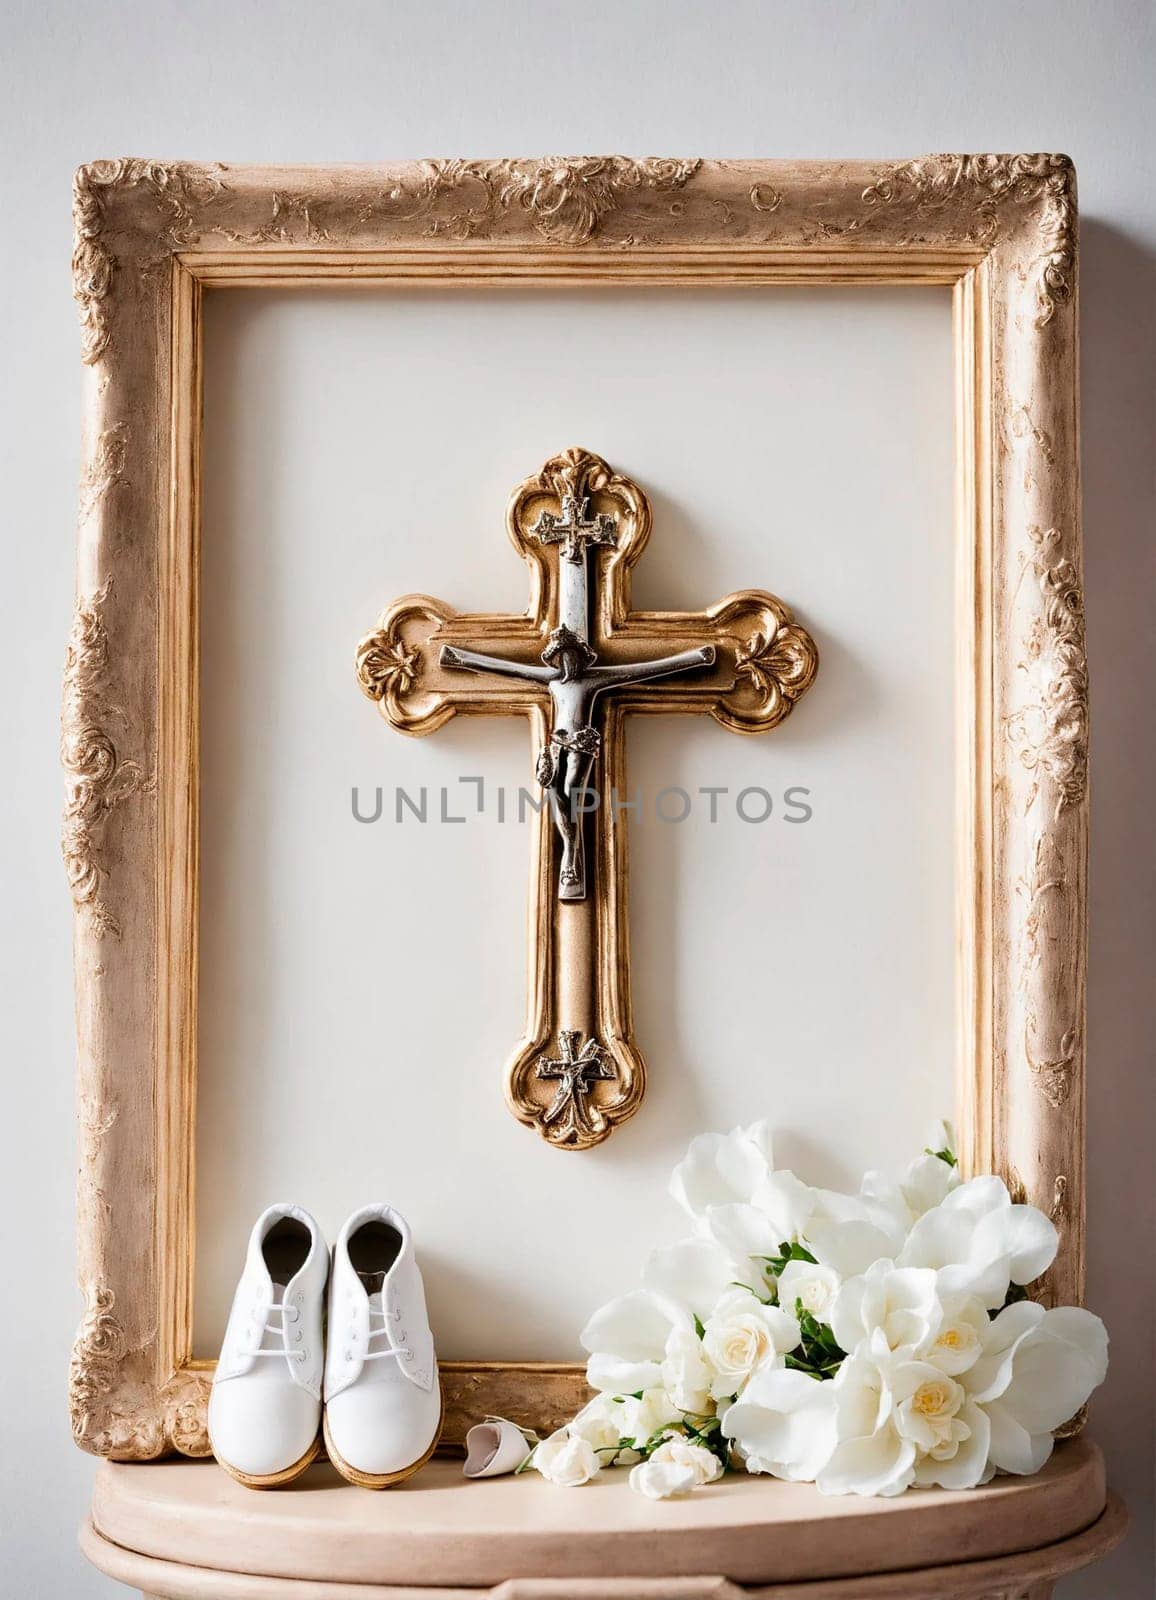 baby booties and a cross for baptism. Selective focus. by yanadjana